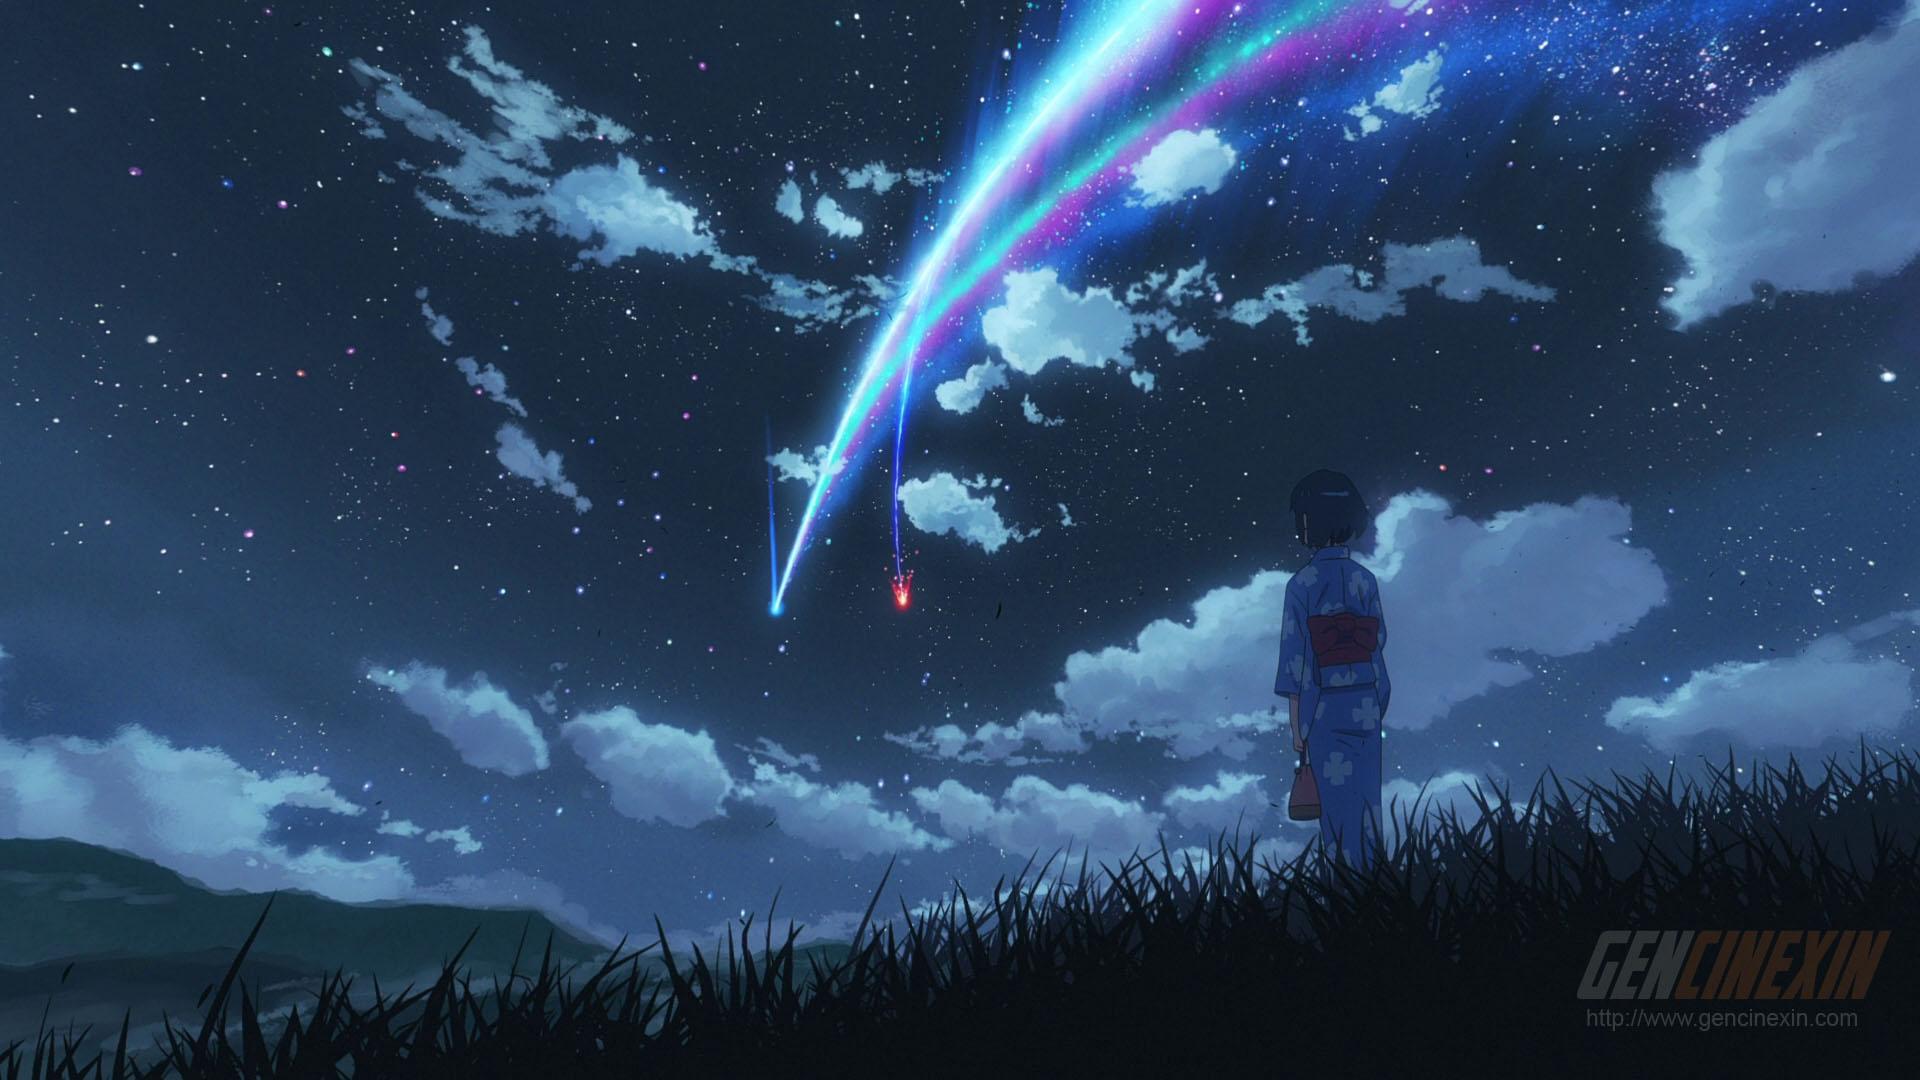 BEST WALLPAPER: Your Name Wallpaper PC